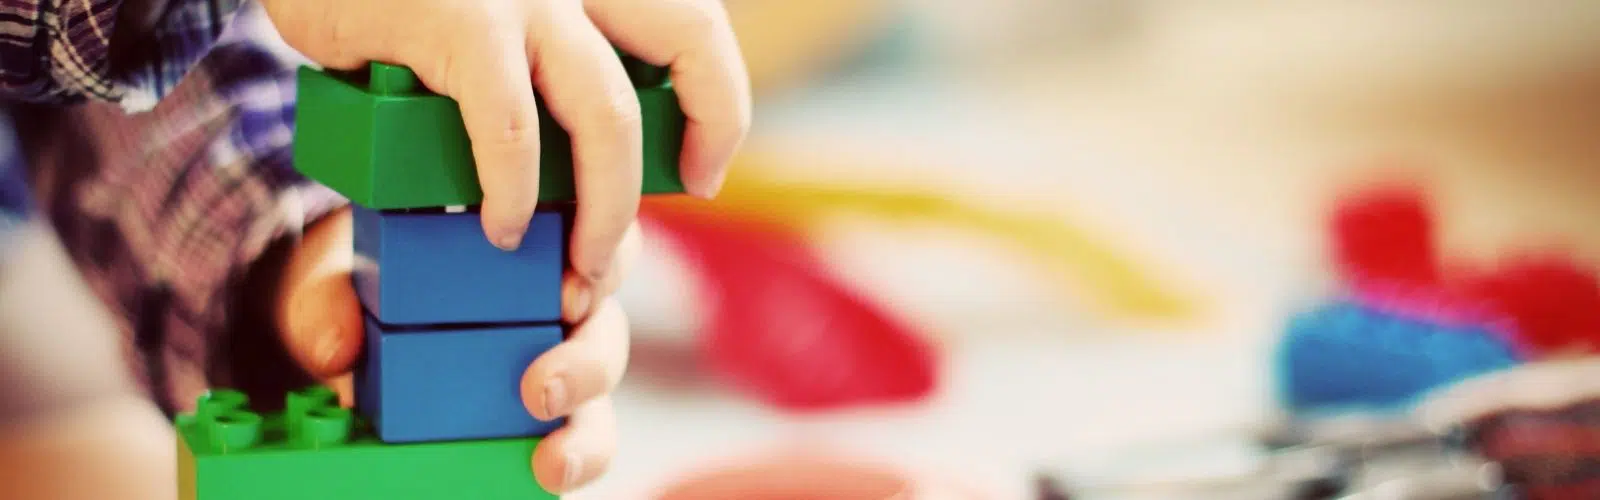 Fine motor skills: 6 activities and workshops to develop them in young children